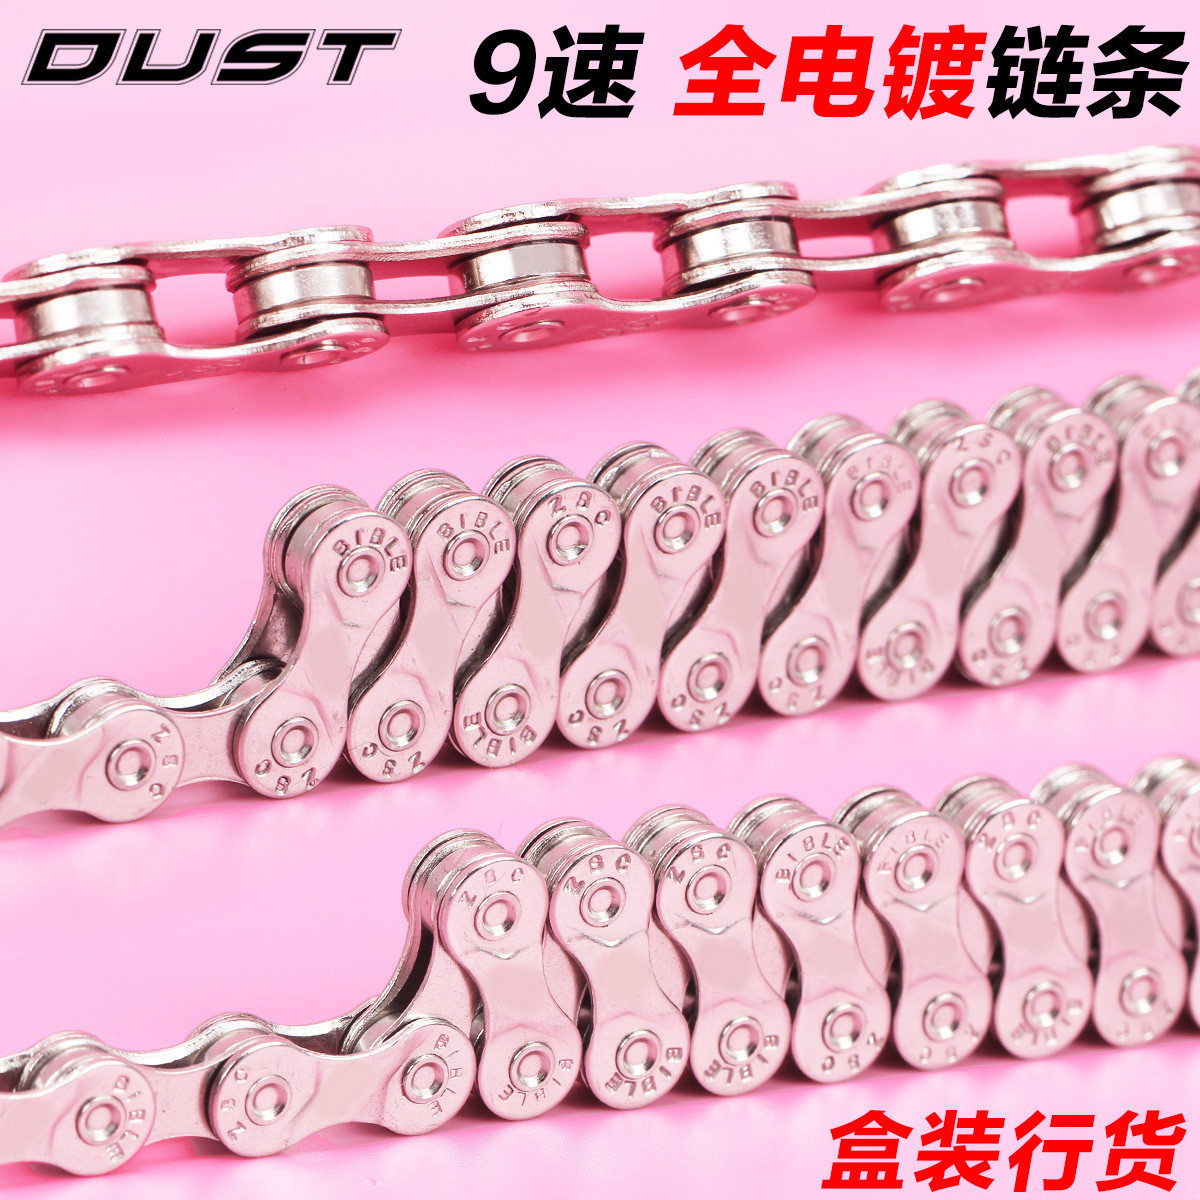 Bicycle Chain 9 Speed Chain Mountain Bike Chain 27 Speed Highway Bicycle Chain with Magic Button